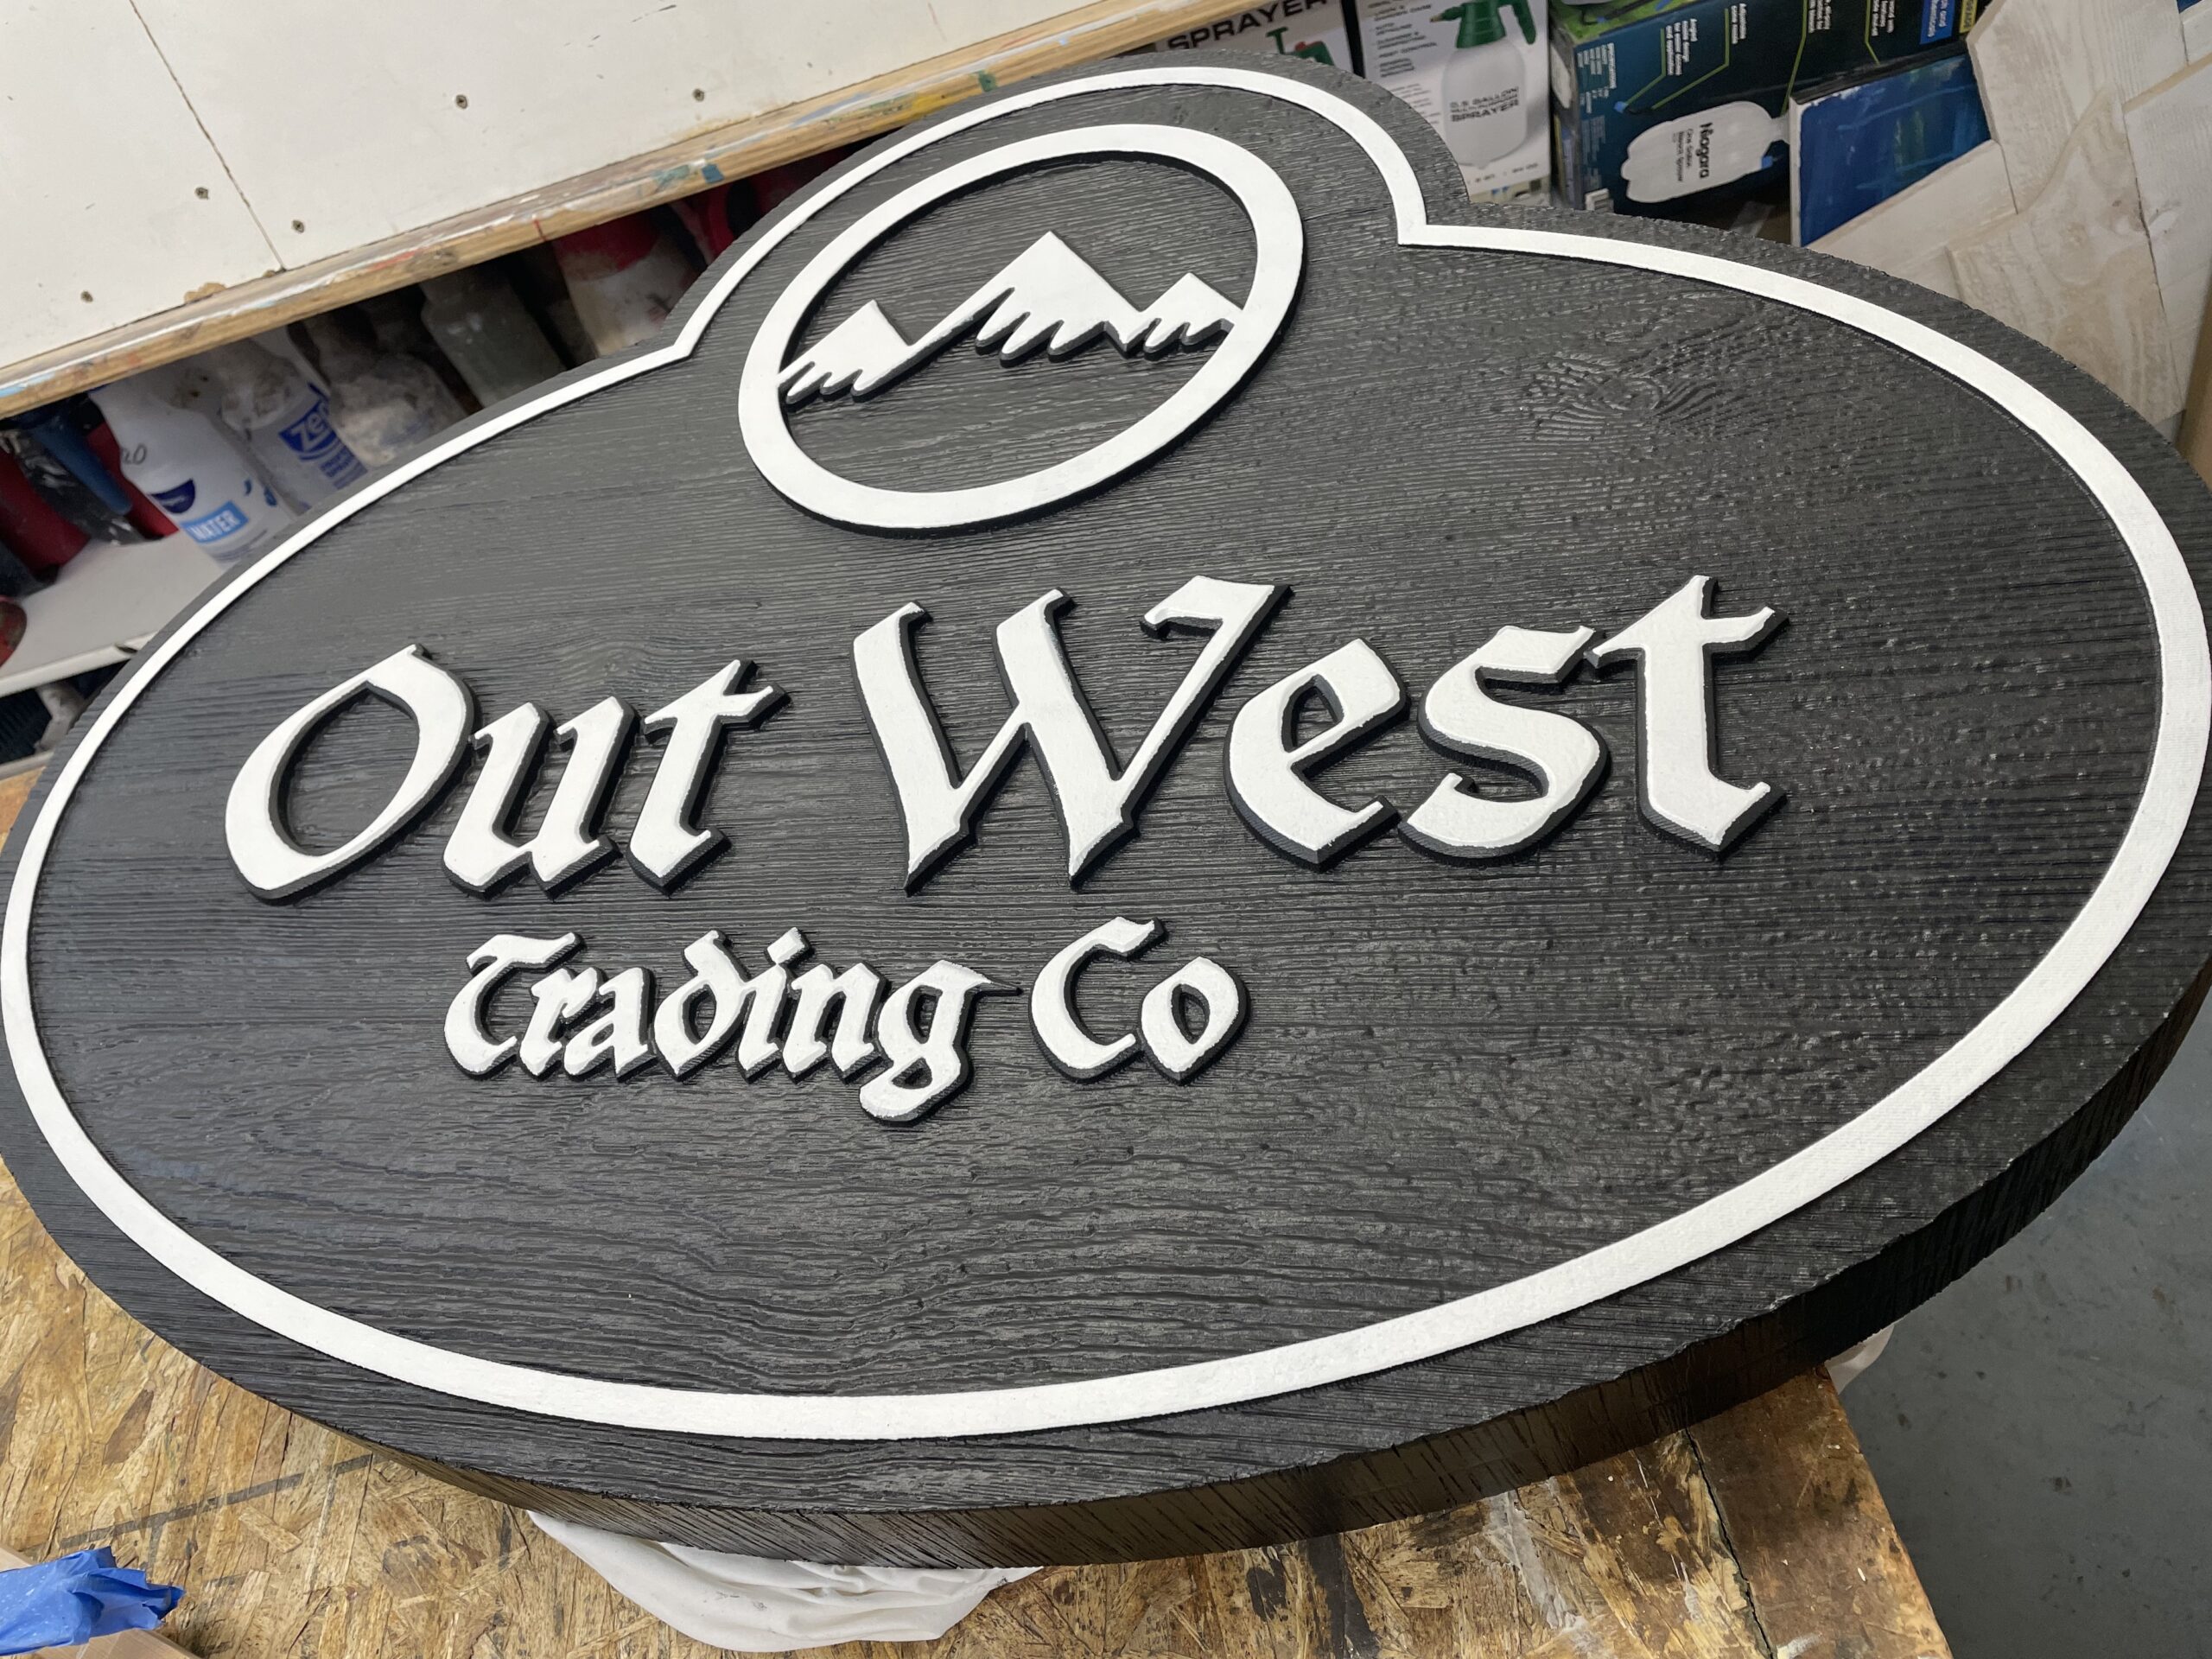 Black and white sign with wood grain texture